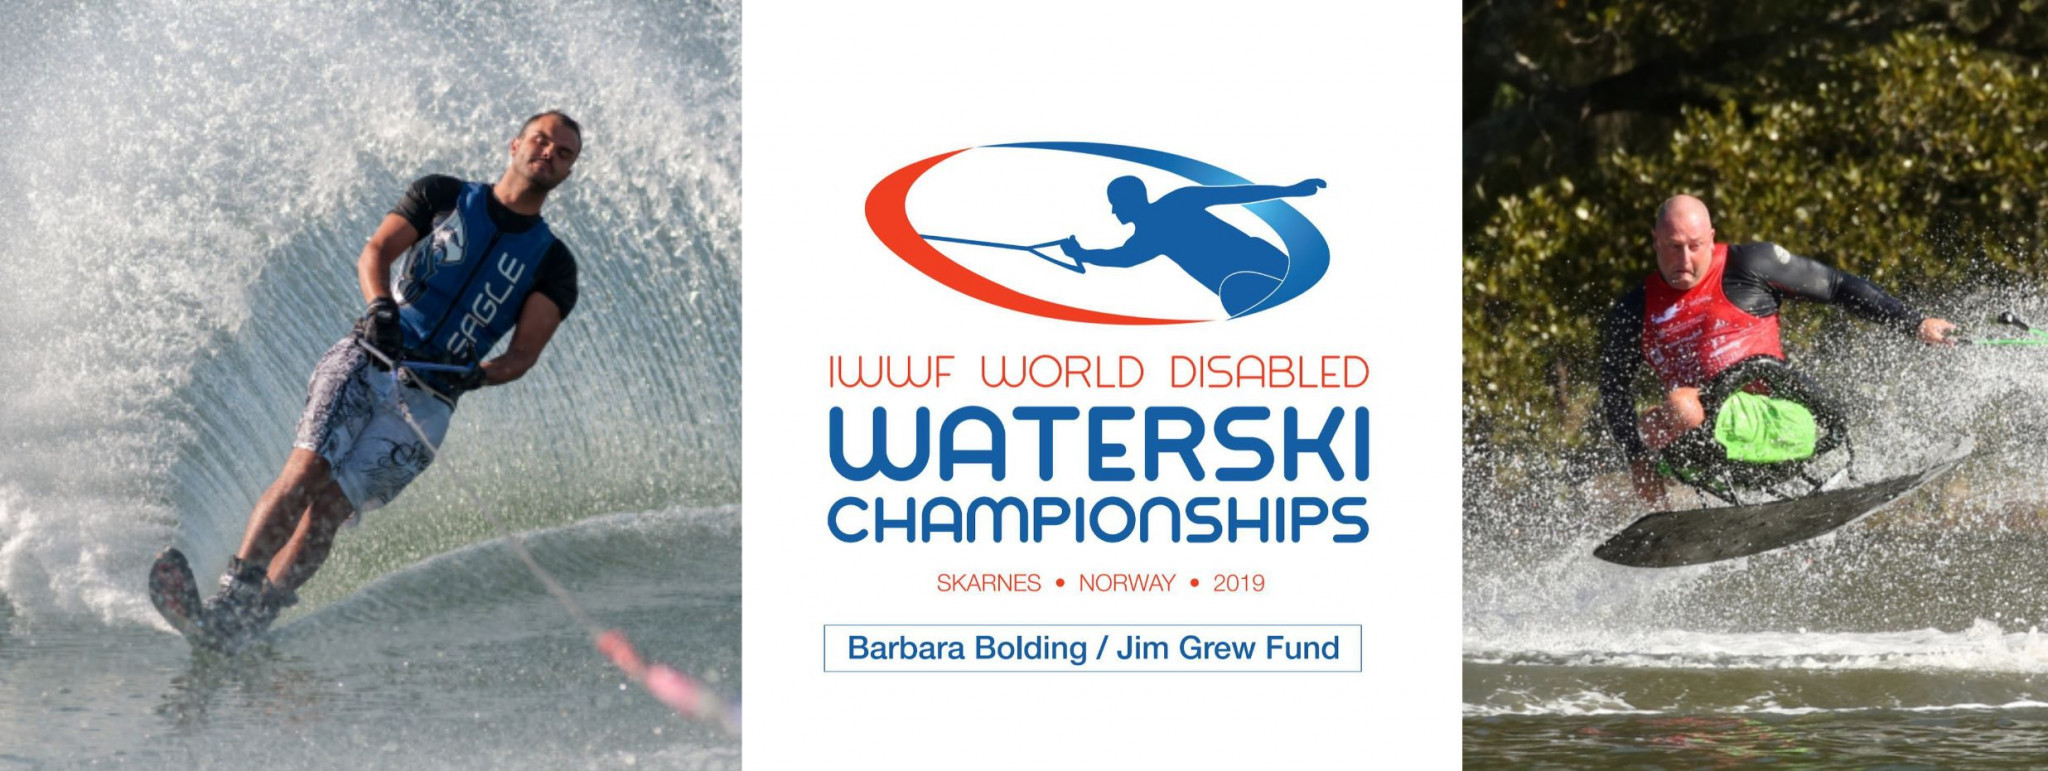 United States won the overall gold medal at the International Waterski and Wakeboard Federation World Disabled Championships in Norway ©IWWF